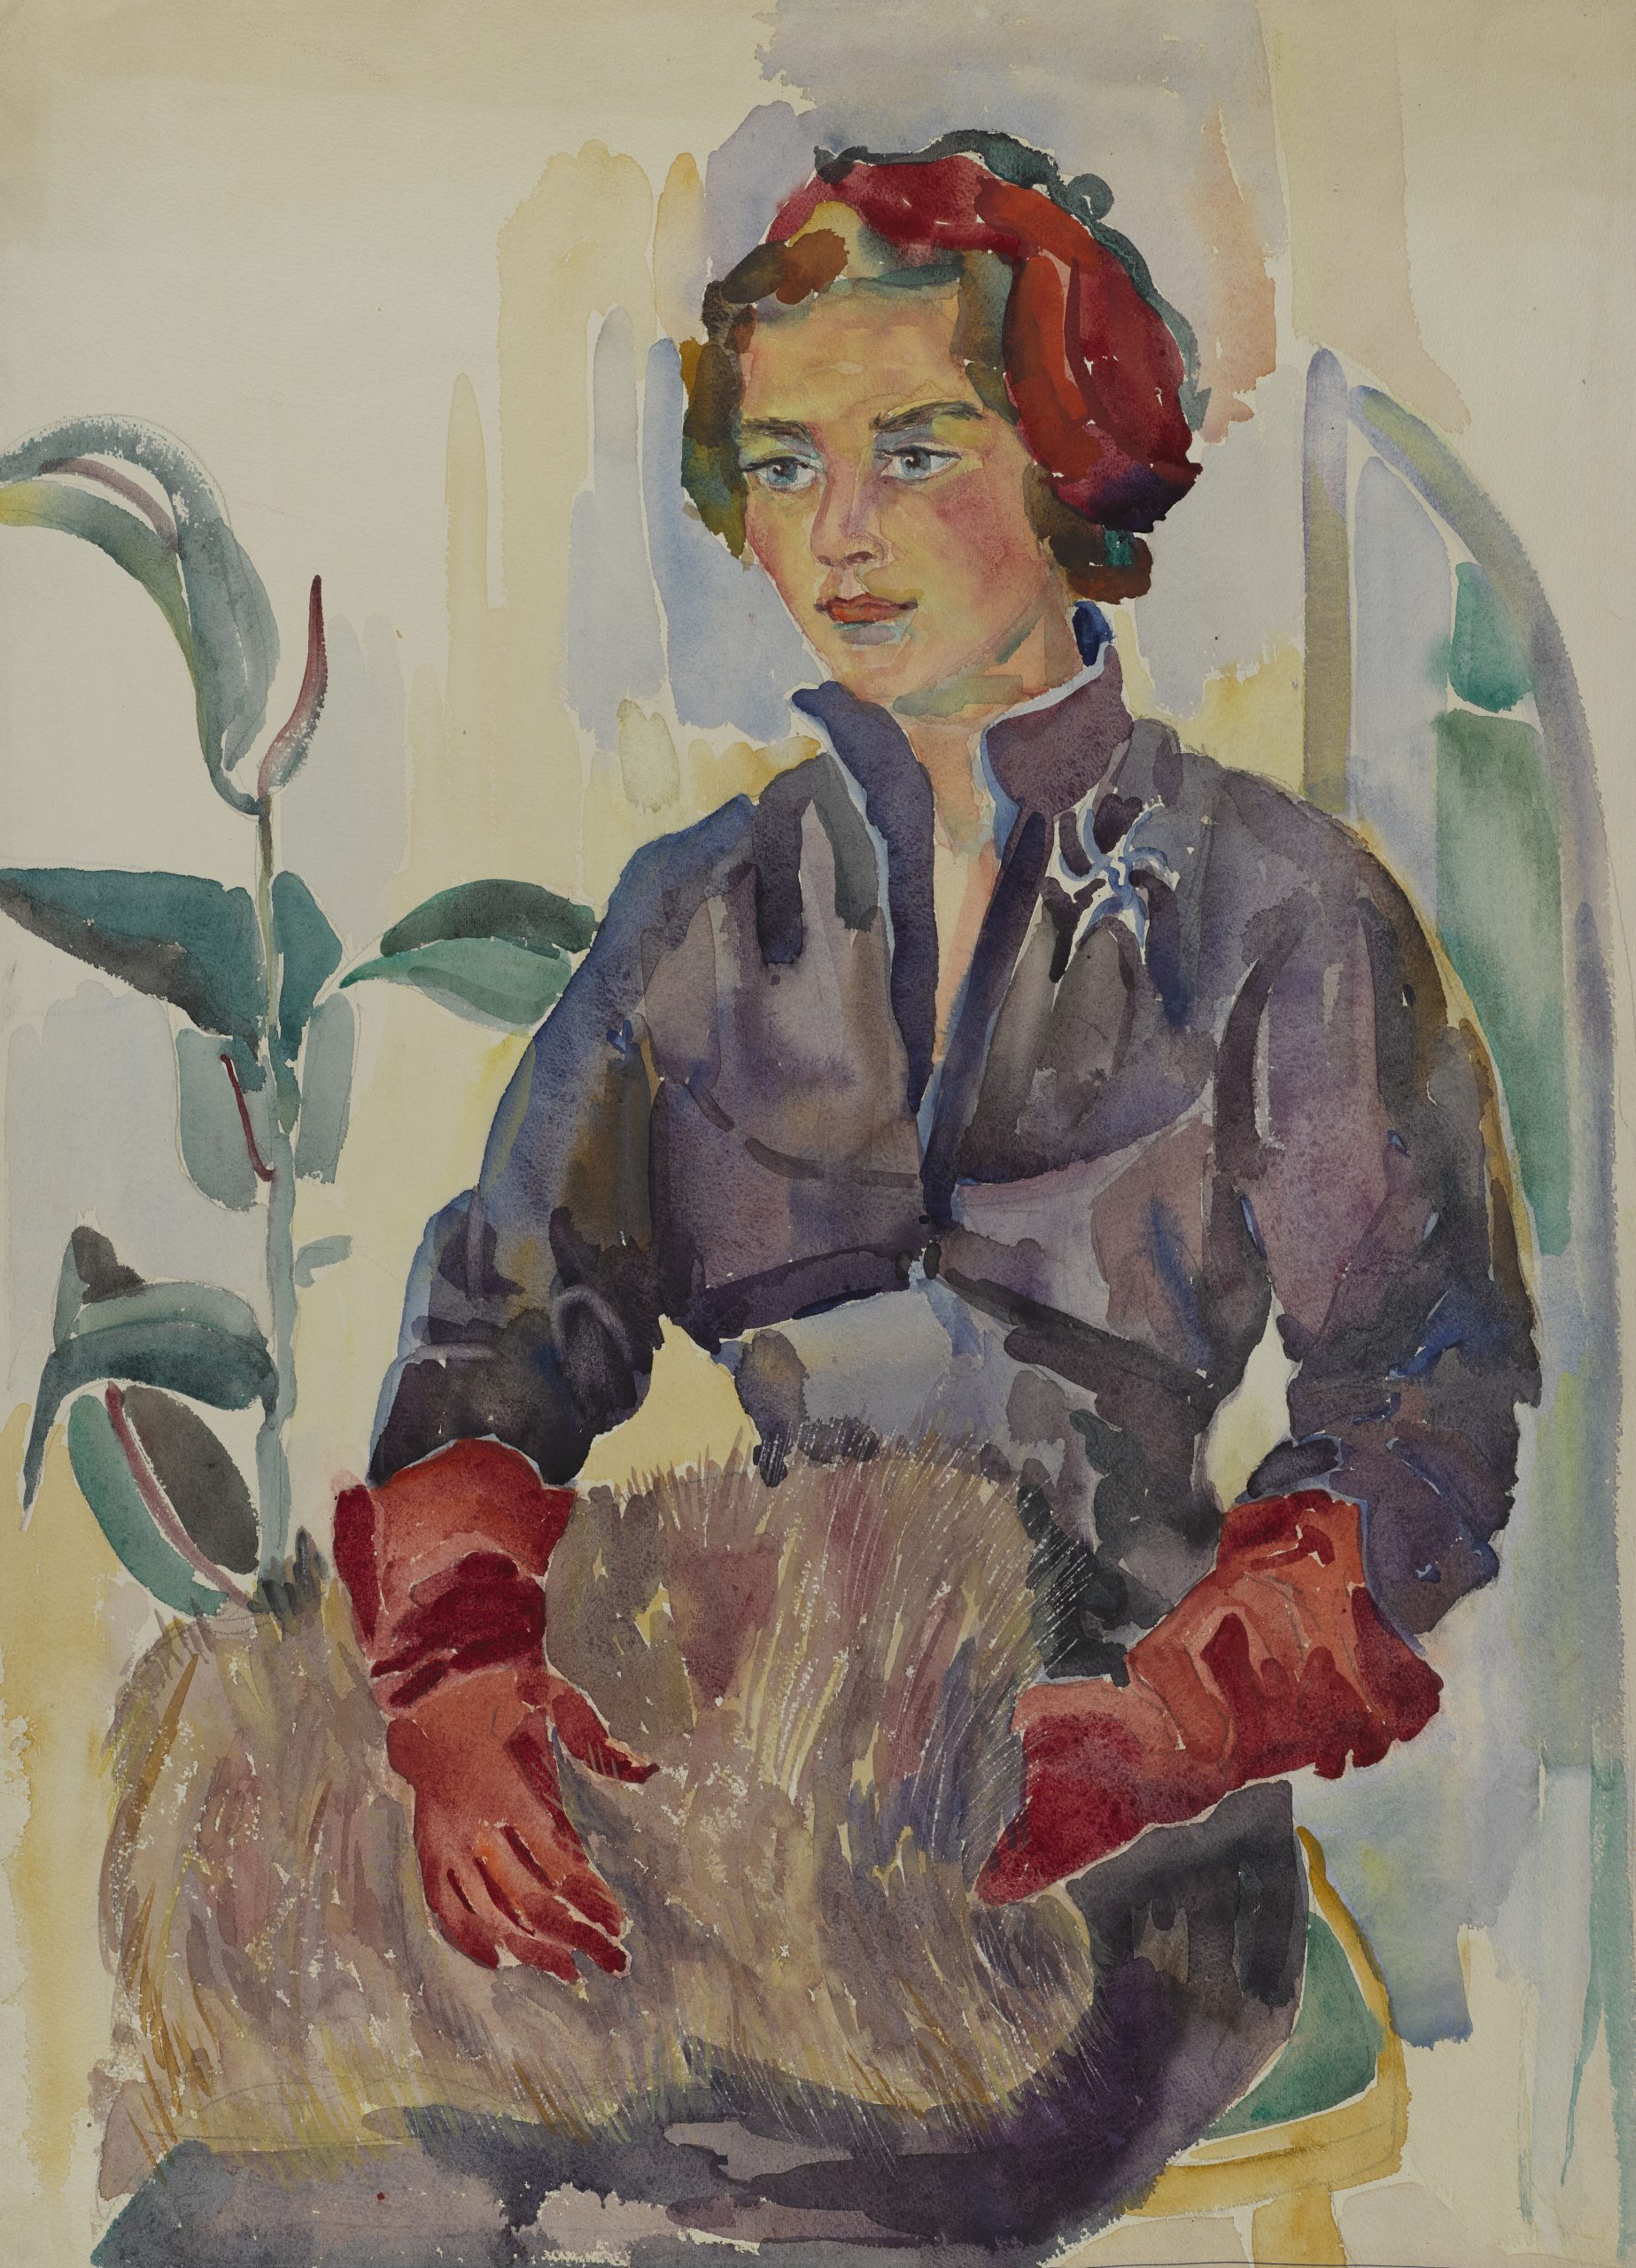 Dame mit roten Handschuhen / Lady with red gloves ca. 1954 54x72 Aquarelle